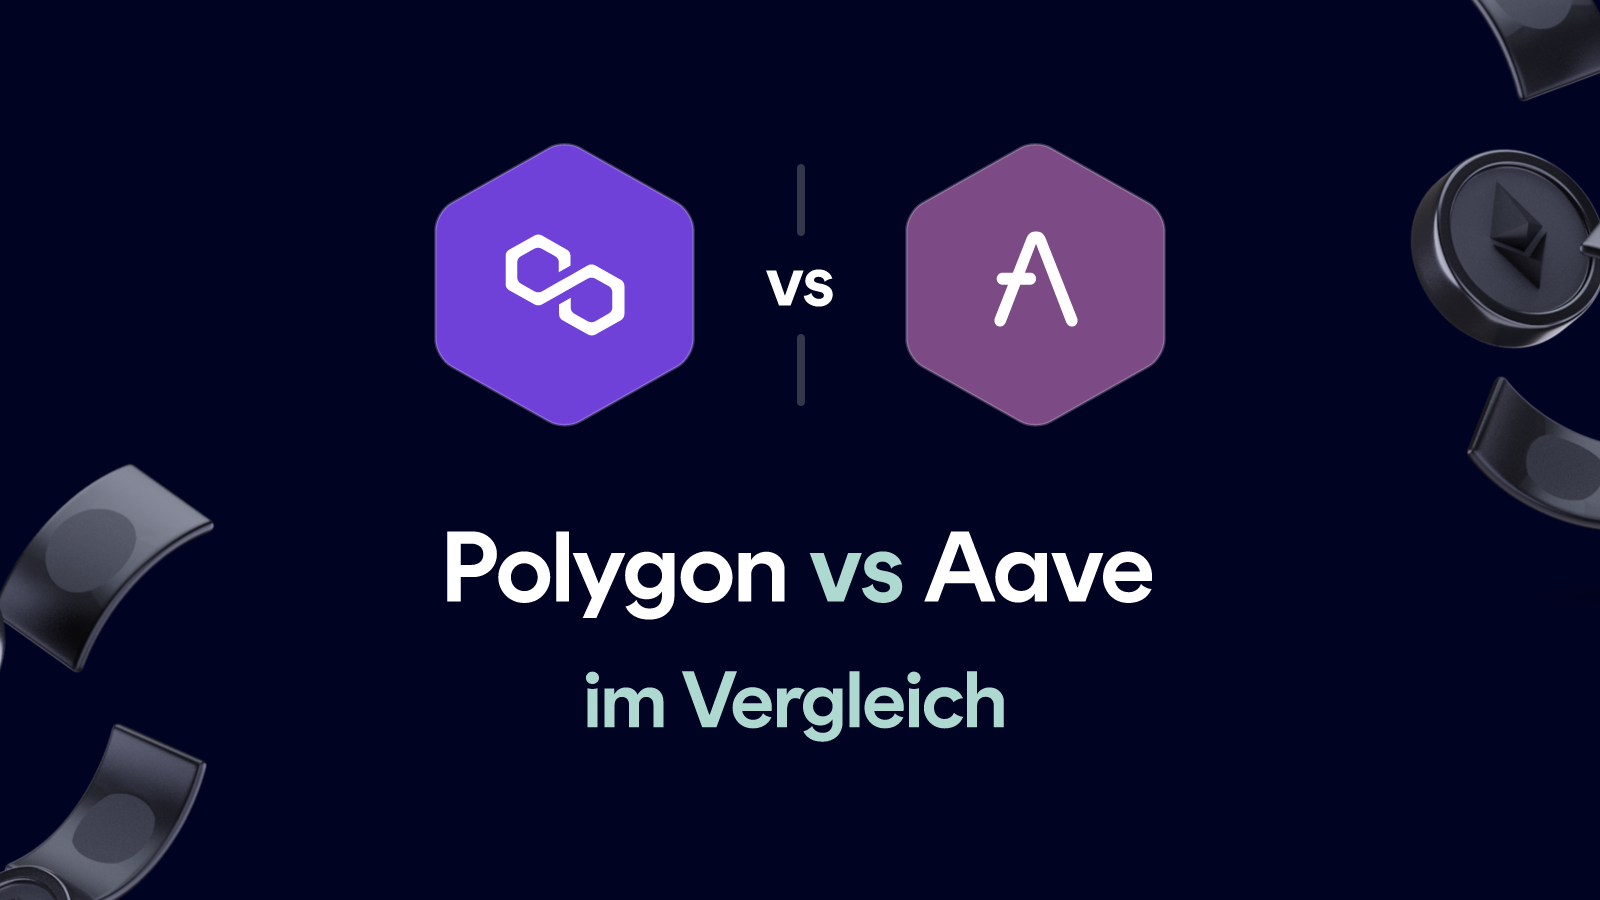 Polygon vs Aave